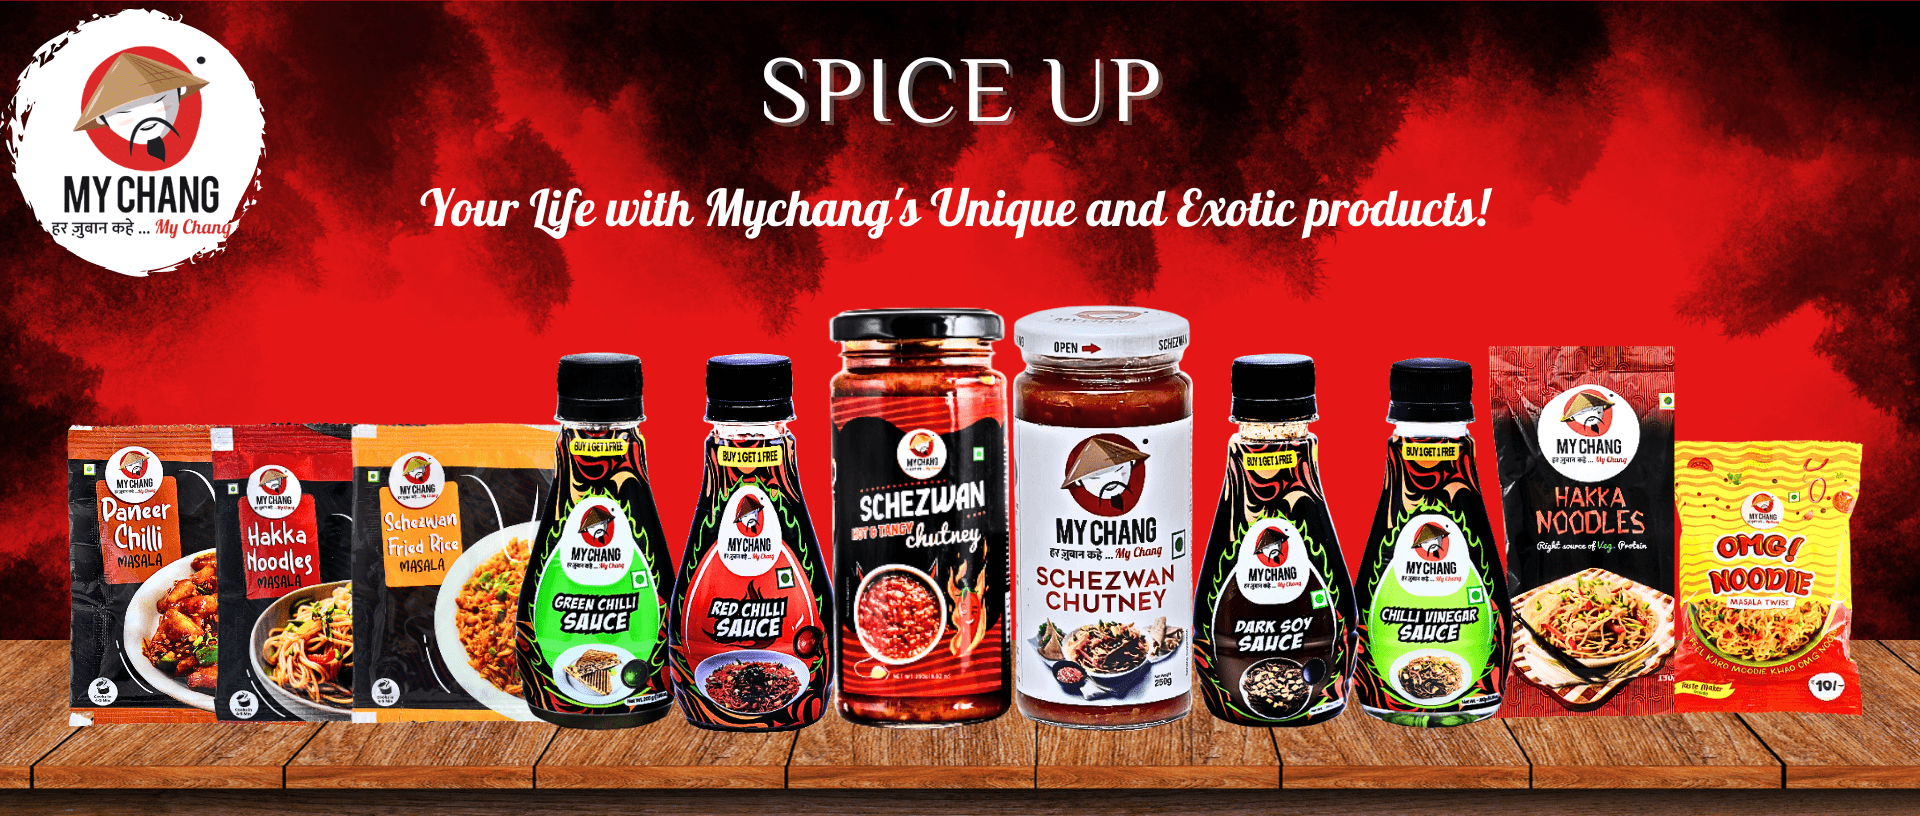 mychang products